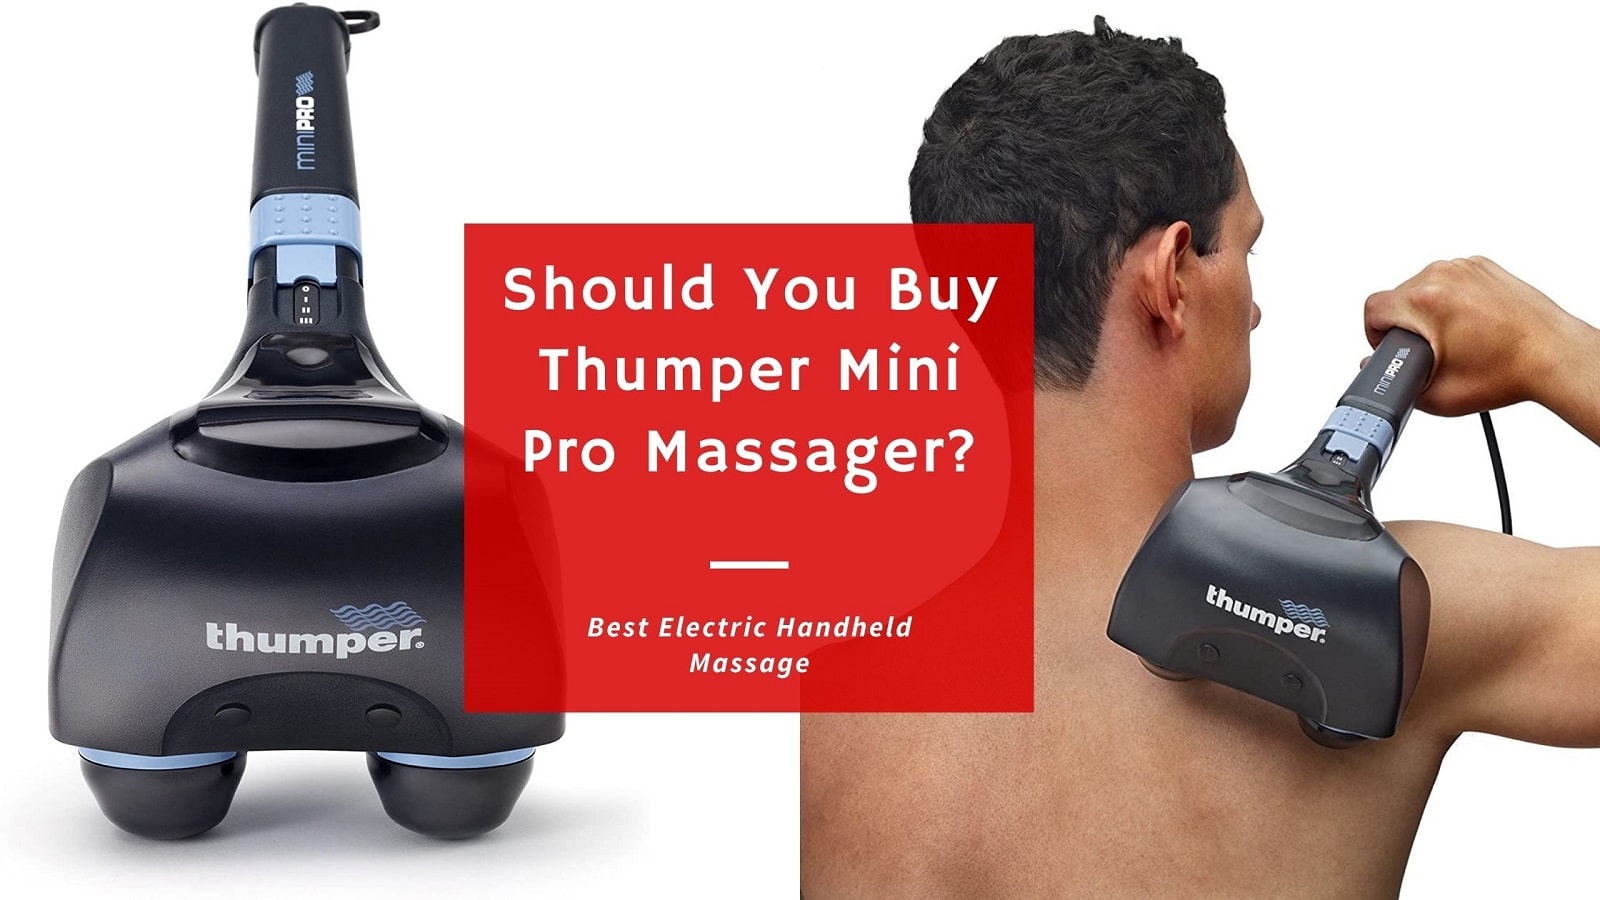 Should You Buy Electric Thumper Mini Pro Massager?